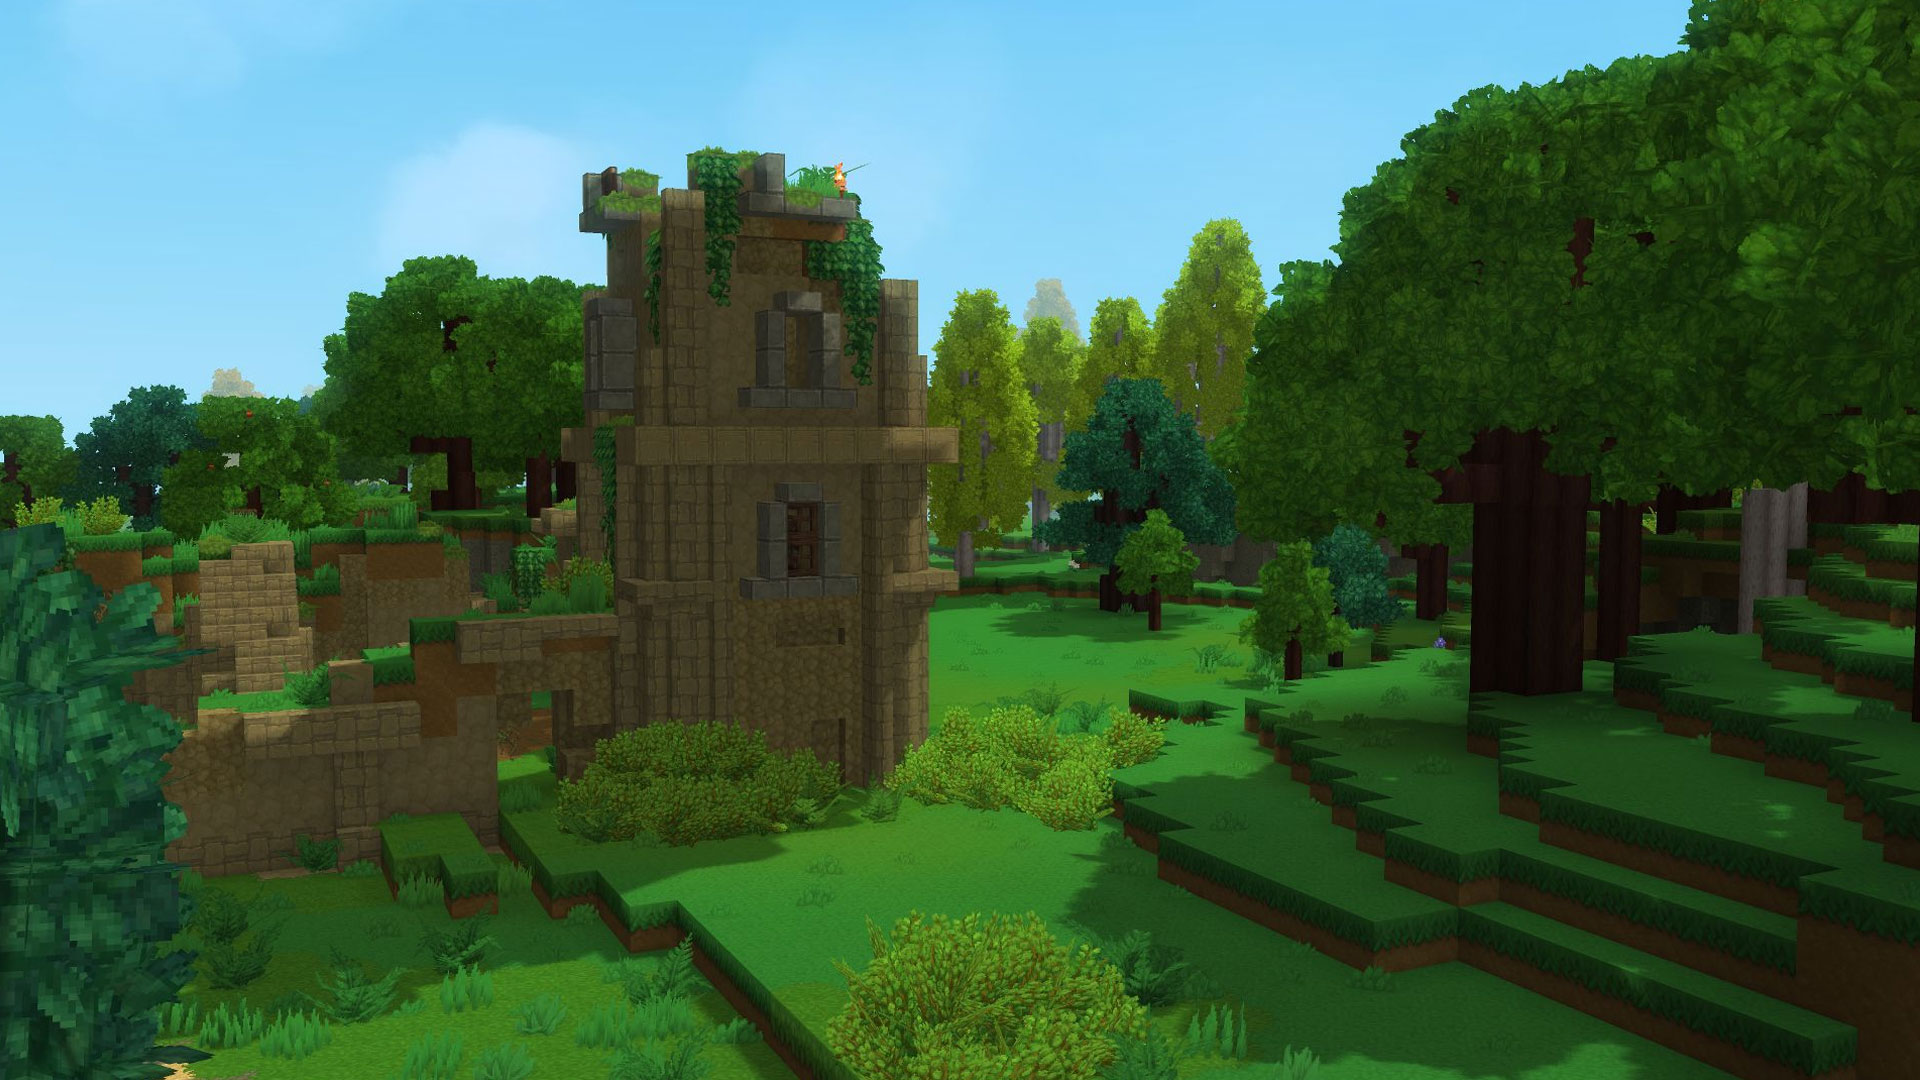 Hytale generated landscape